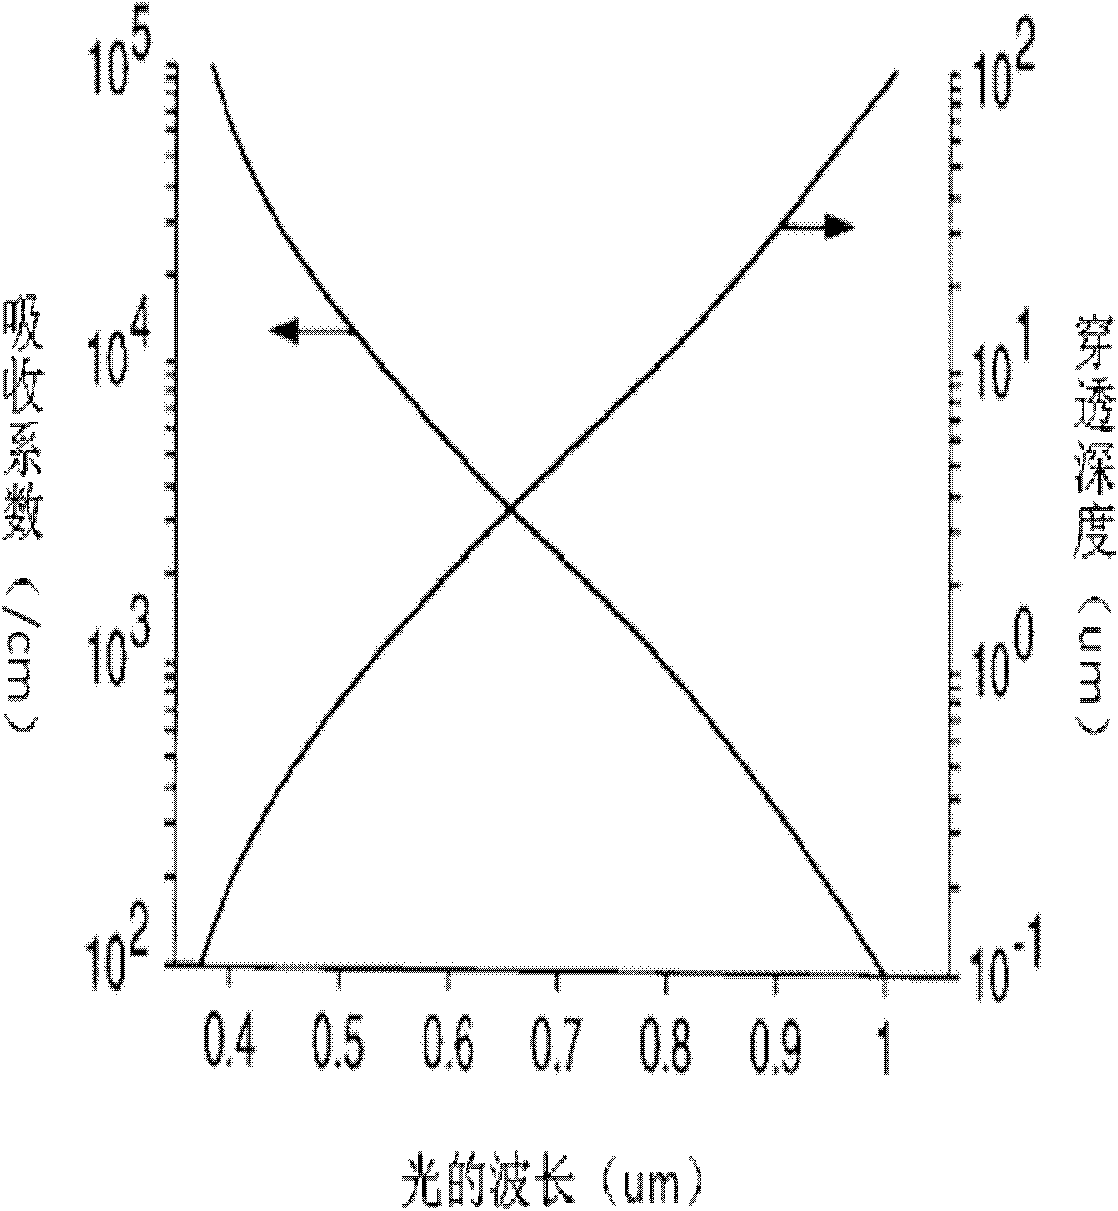 Color imaging method based on photosensitive composite medium grid metal oxide semiconductor field effect transistor (MOSFET) detector